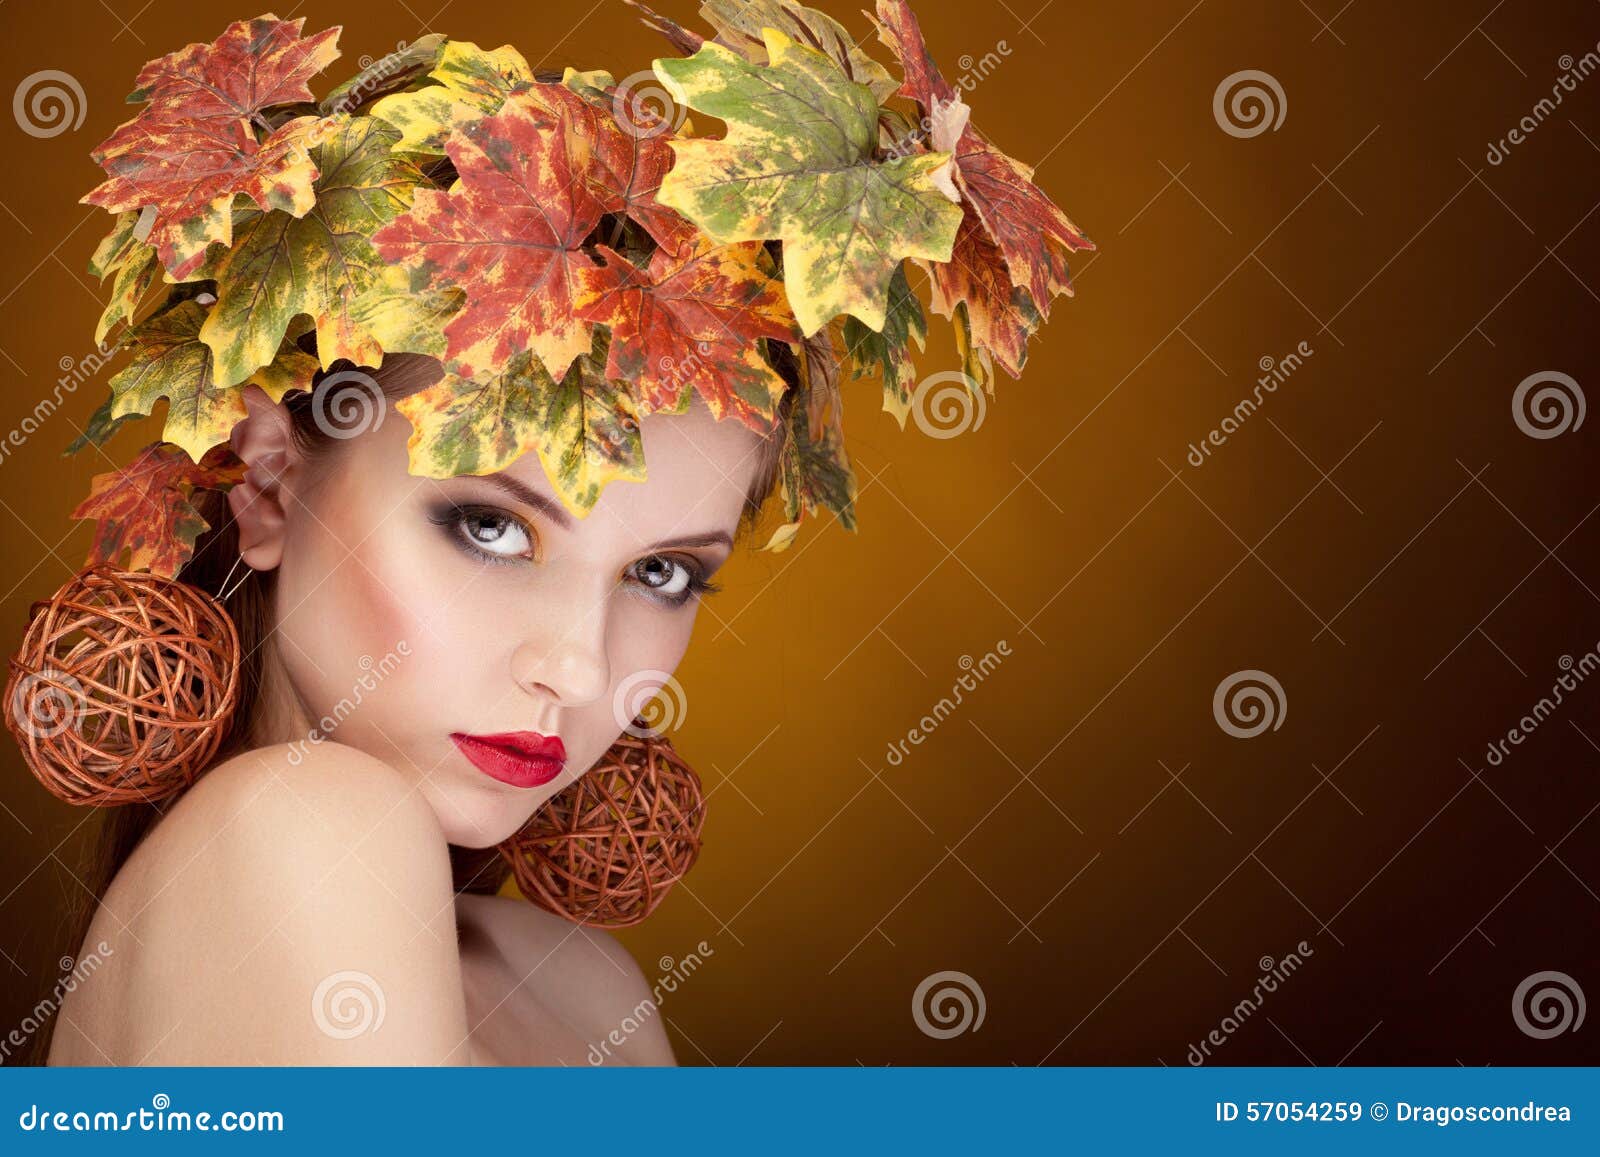 Woman with Leafs on Head in Autumn Concept Stock Image - Image of gold ...